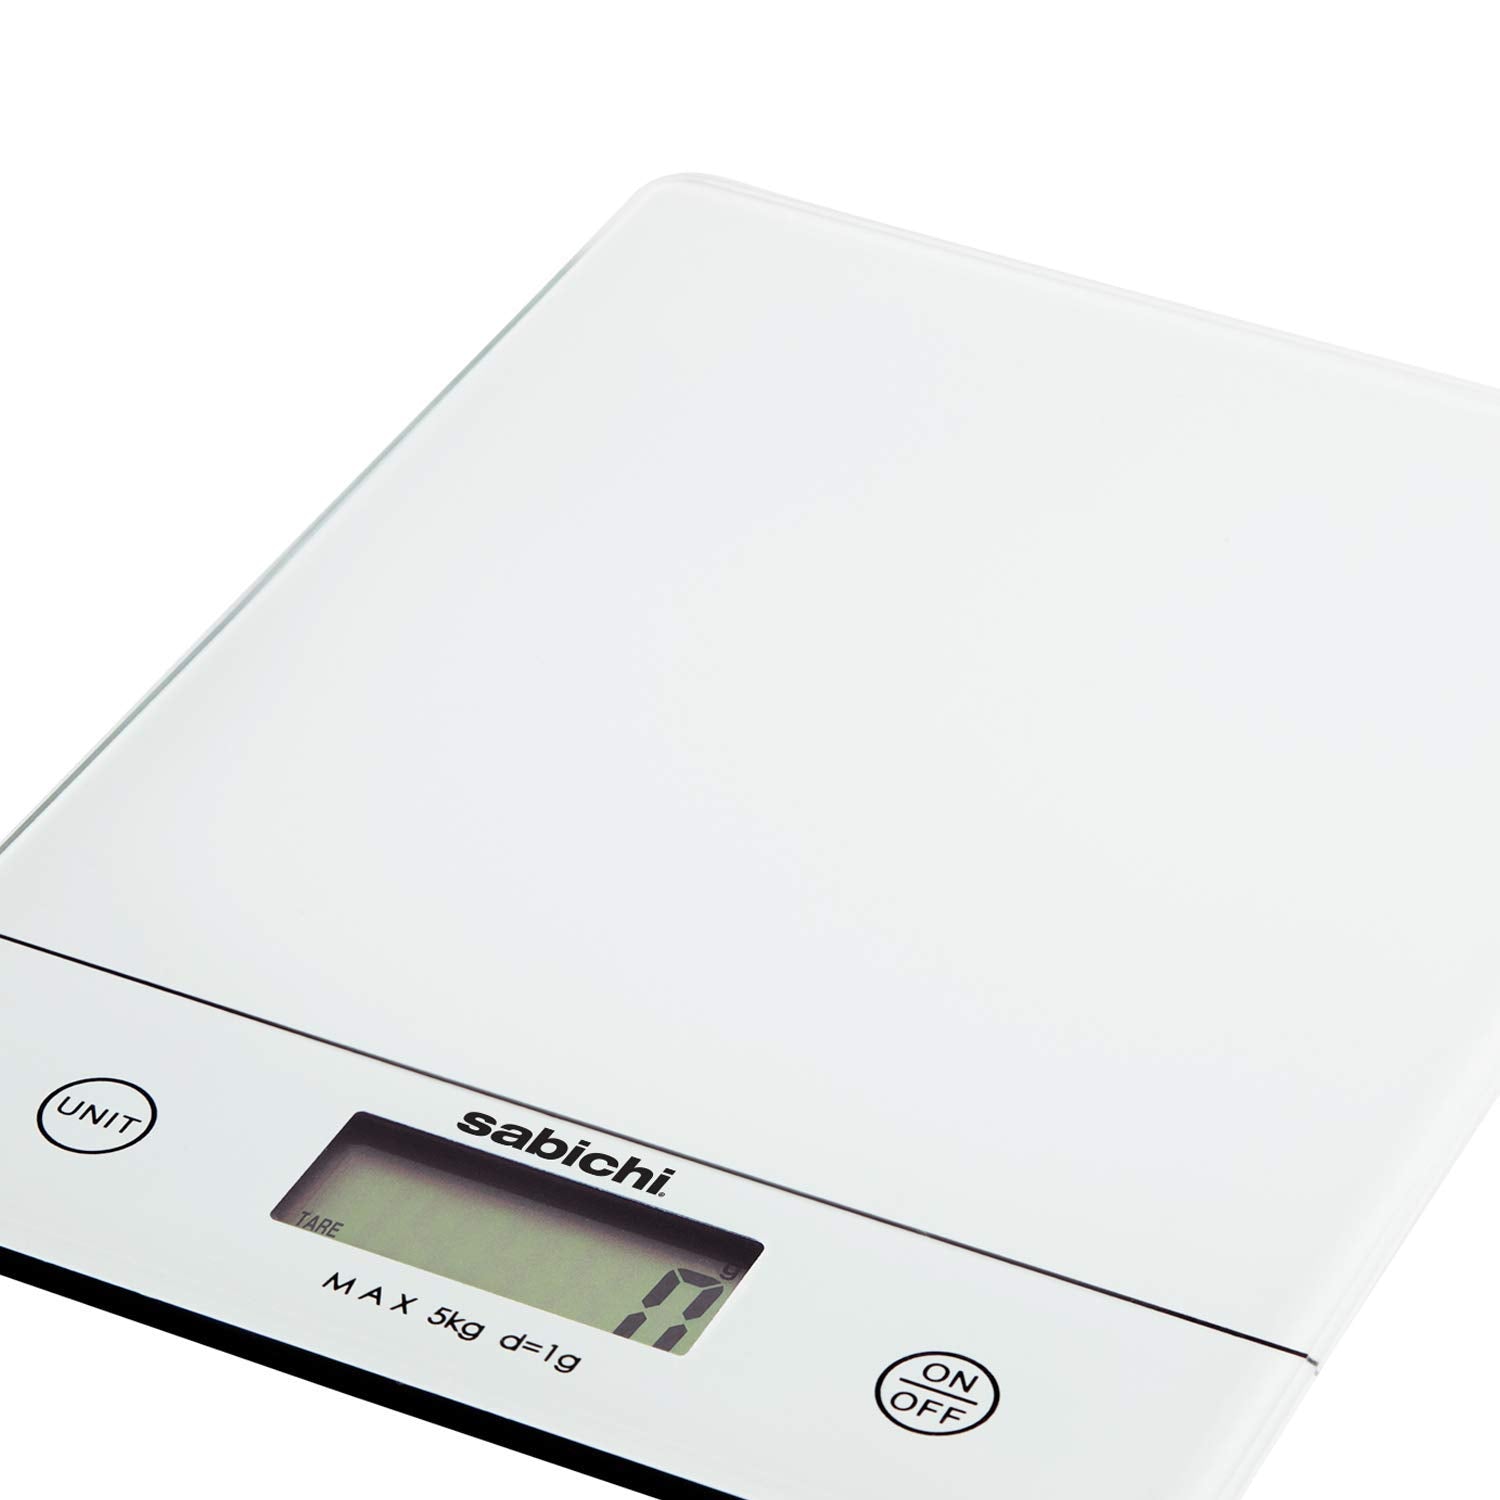 Digital food scale for diet, kitchen scale 5kg capacity stainless steel, digital  kitchen scale